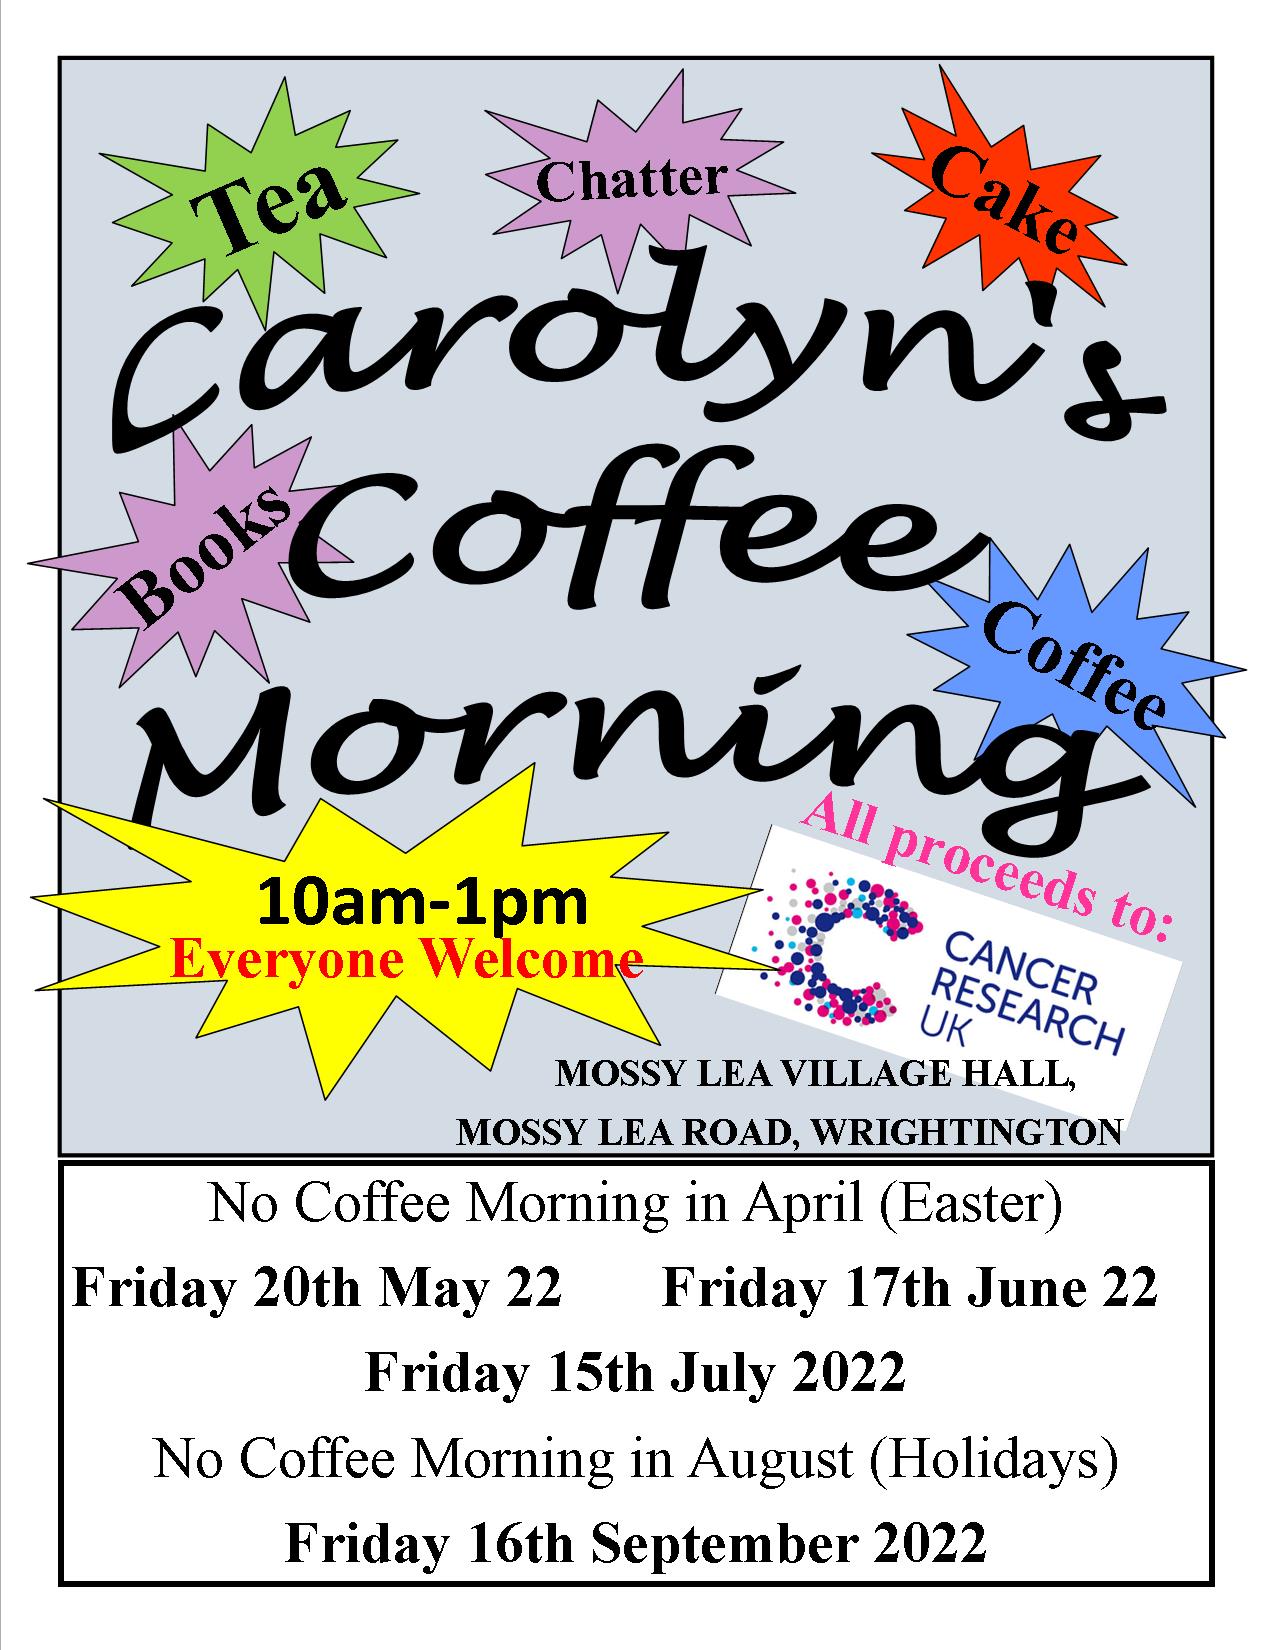 Coffee Morning at Mossey Lea Village Hall - 10am to 1pm on Friday 20th May 2022, 17th June 2022, 15th July 2022 and 16th Sept 2022